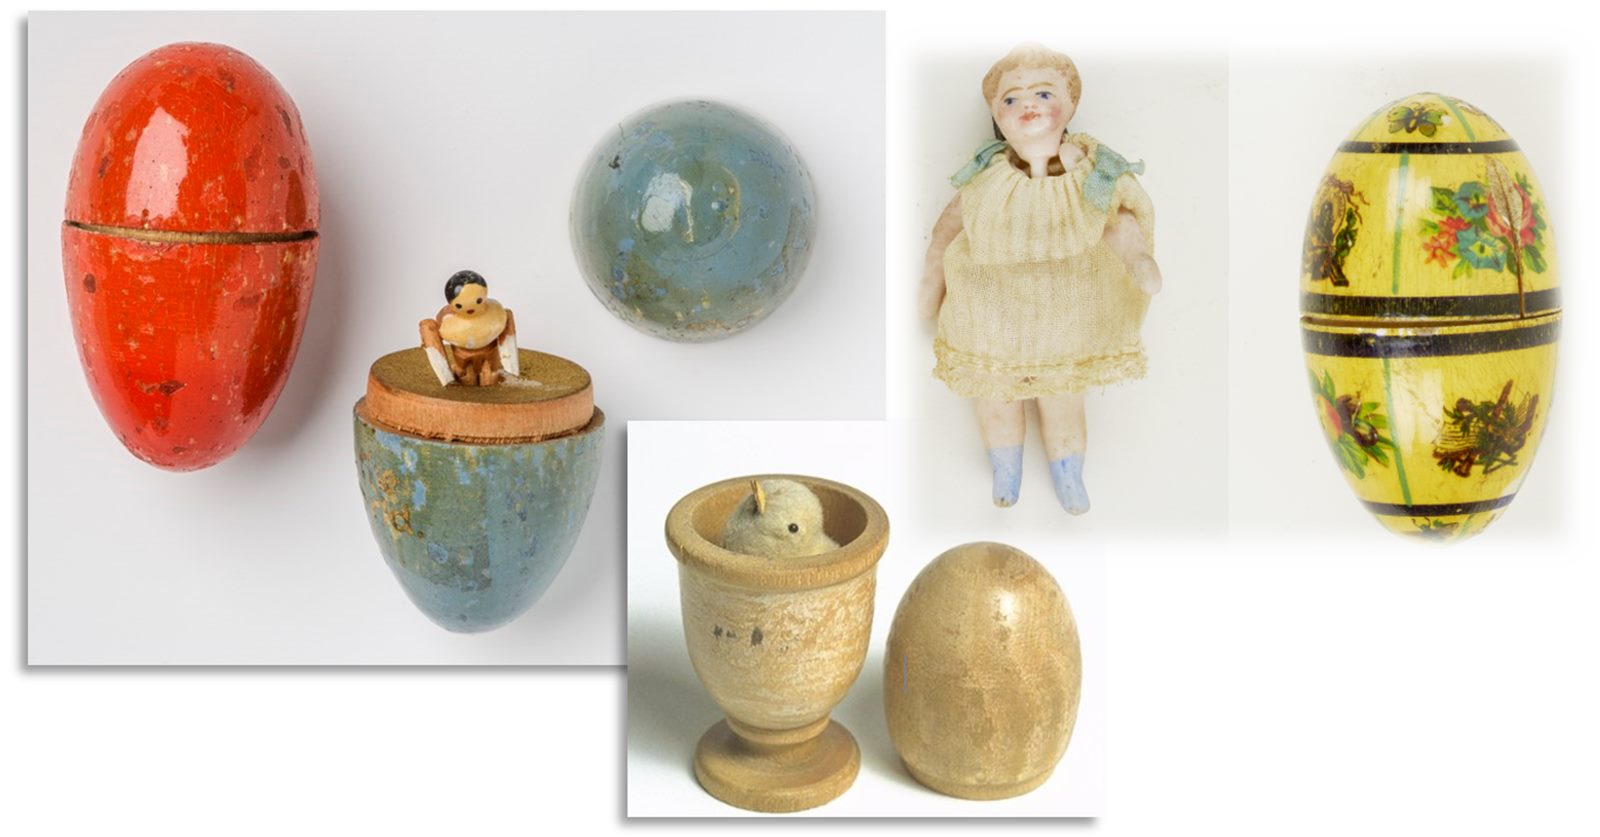 (clockwise from top-left) Two small eggs that belonged to HM Queen Mary, with matchstick dolls inside, 1907 (Royal Collection Trust / © Her Majesty Queen Elizabeth II 2022); a small doll of painted bisque, dressed in cotton clothing, which would have been stored inside the yellow painted egg (ID no.: 37.43/5); and a wooden egg with a small yellow chick inside (ID no.: 80.525/563).